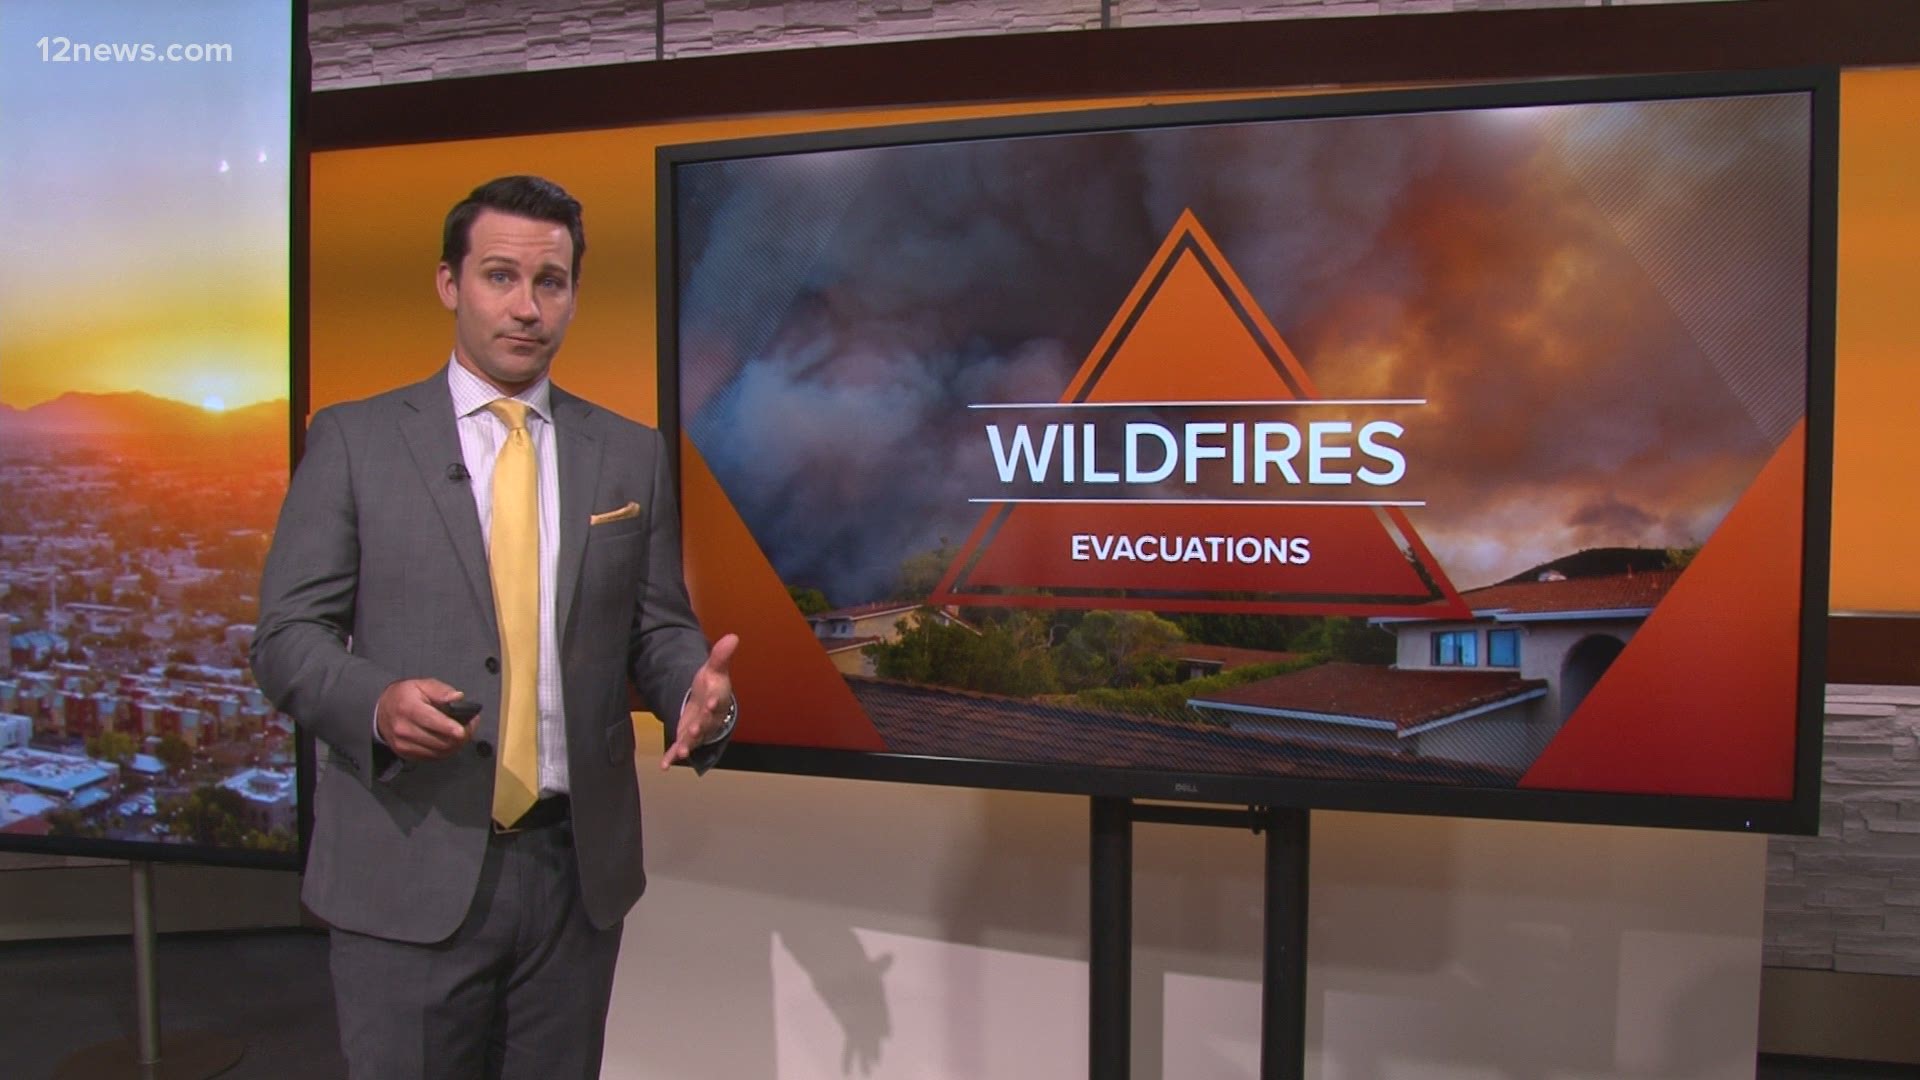 Ryan Cody explains what we need to do to prepare ahead of wildfire evacuations.